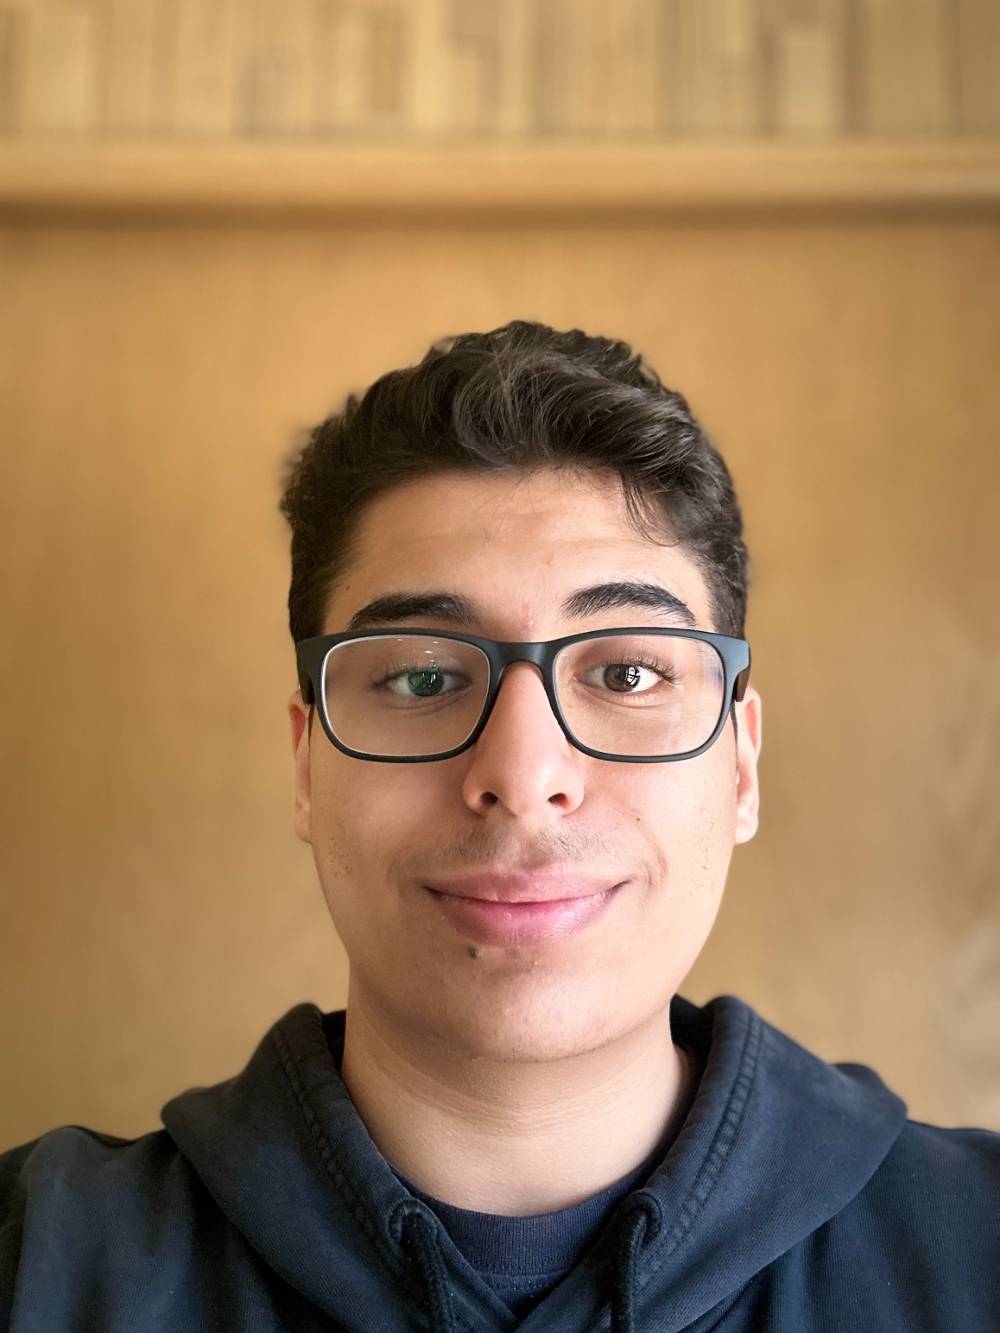 Ramy is smiling directly at the camera. He is wearing dark rimmed glasses, has short brown hair, and is wearing a black hoodie.